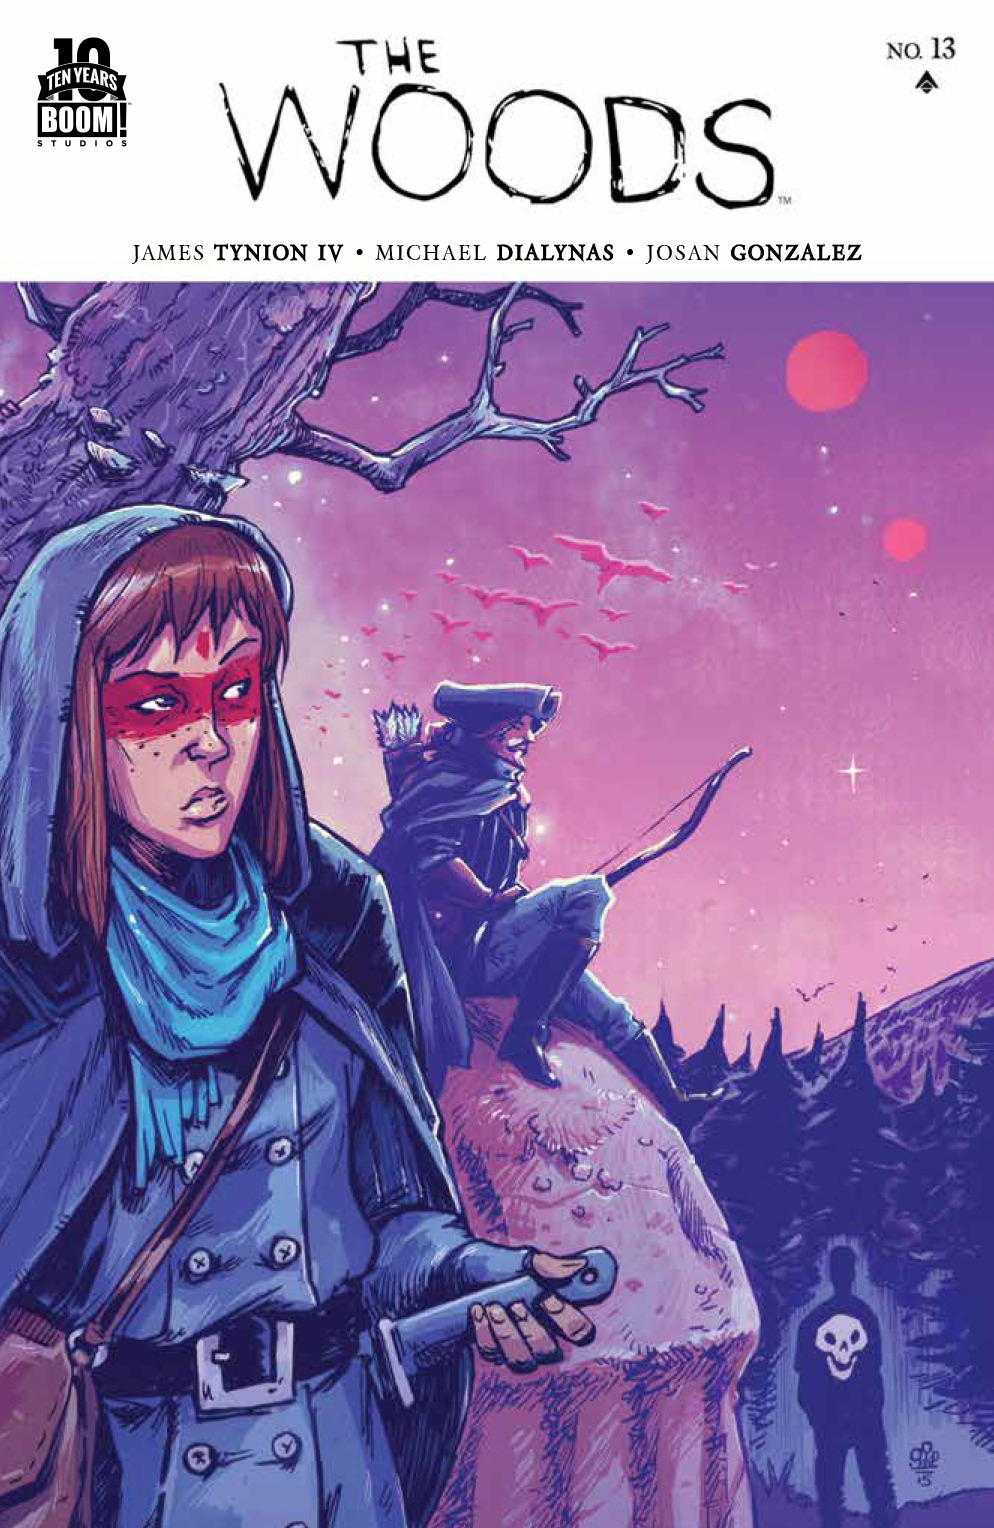 The Woods #13 Preview